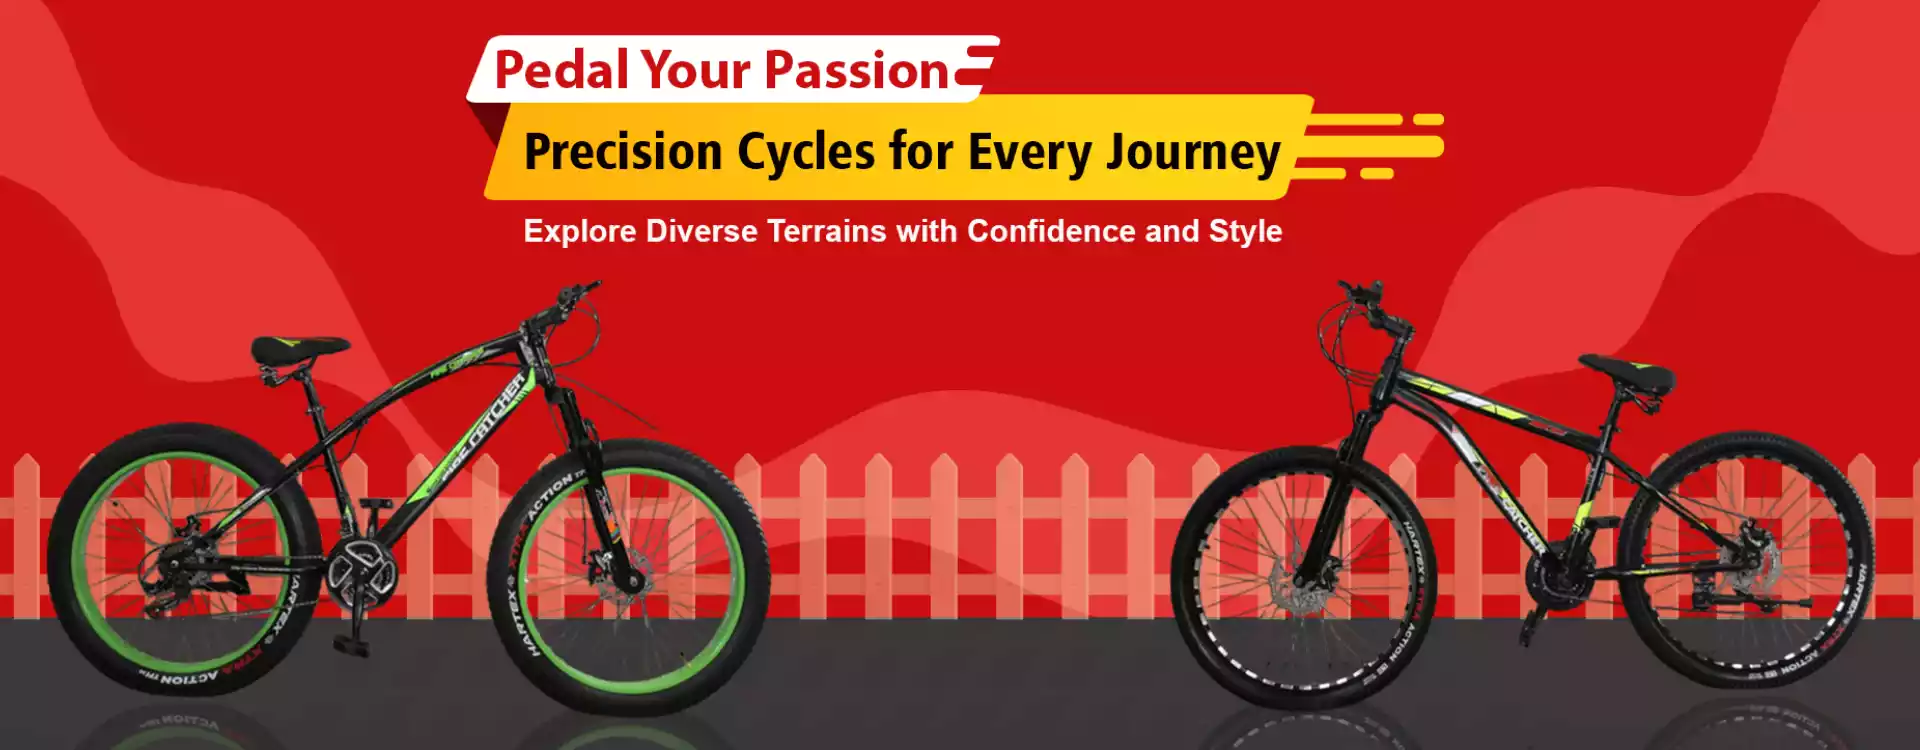 Full Suspension Bicycle Manufacturers Providing Quality